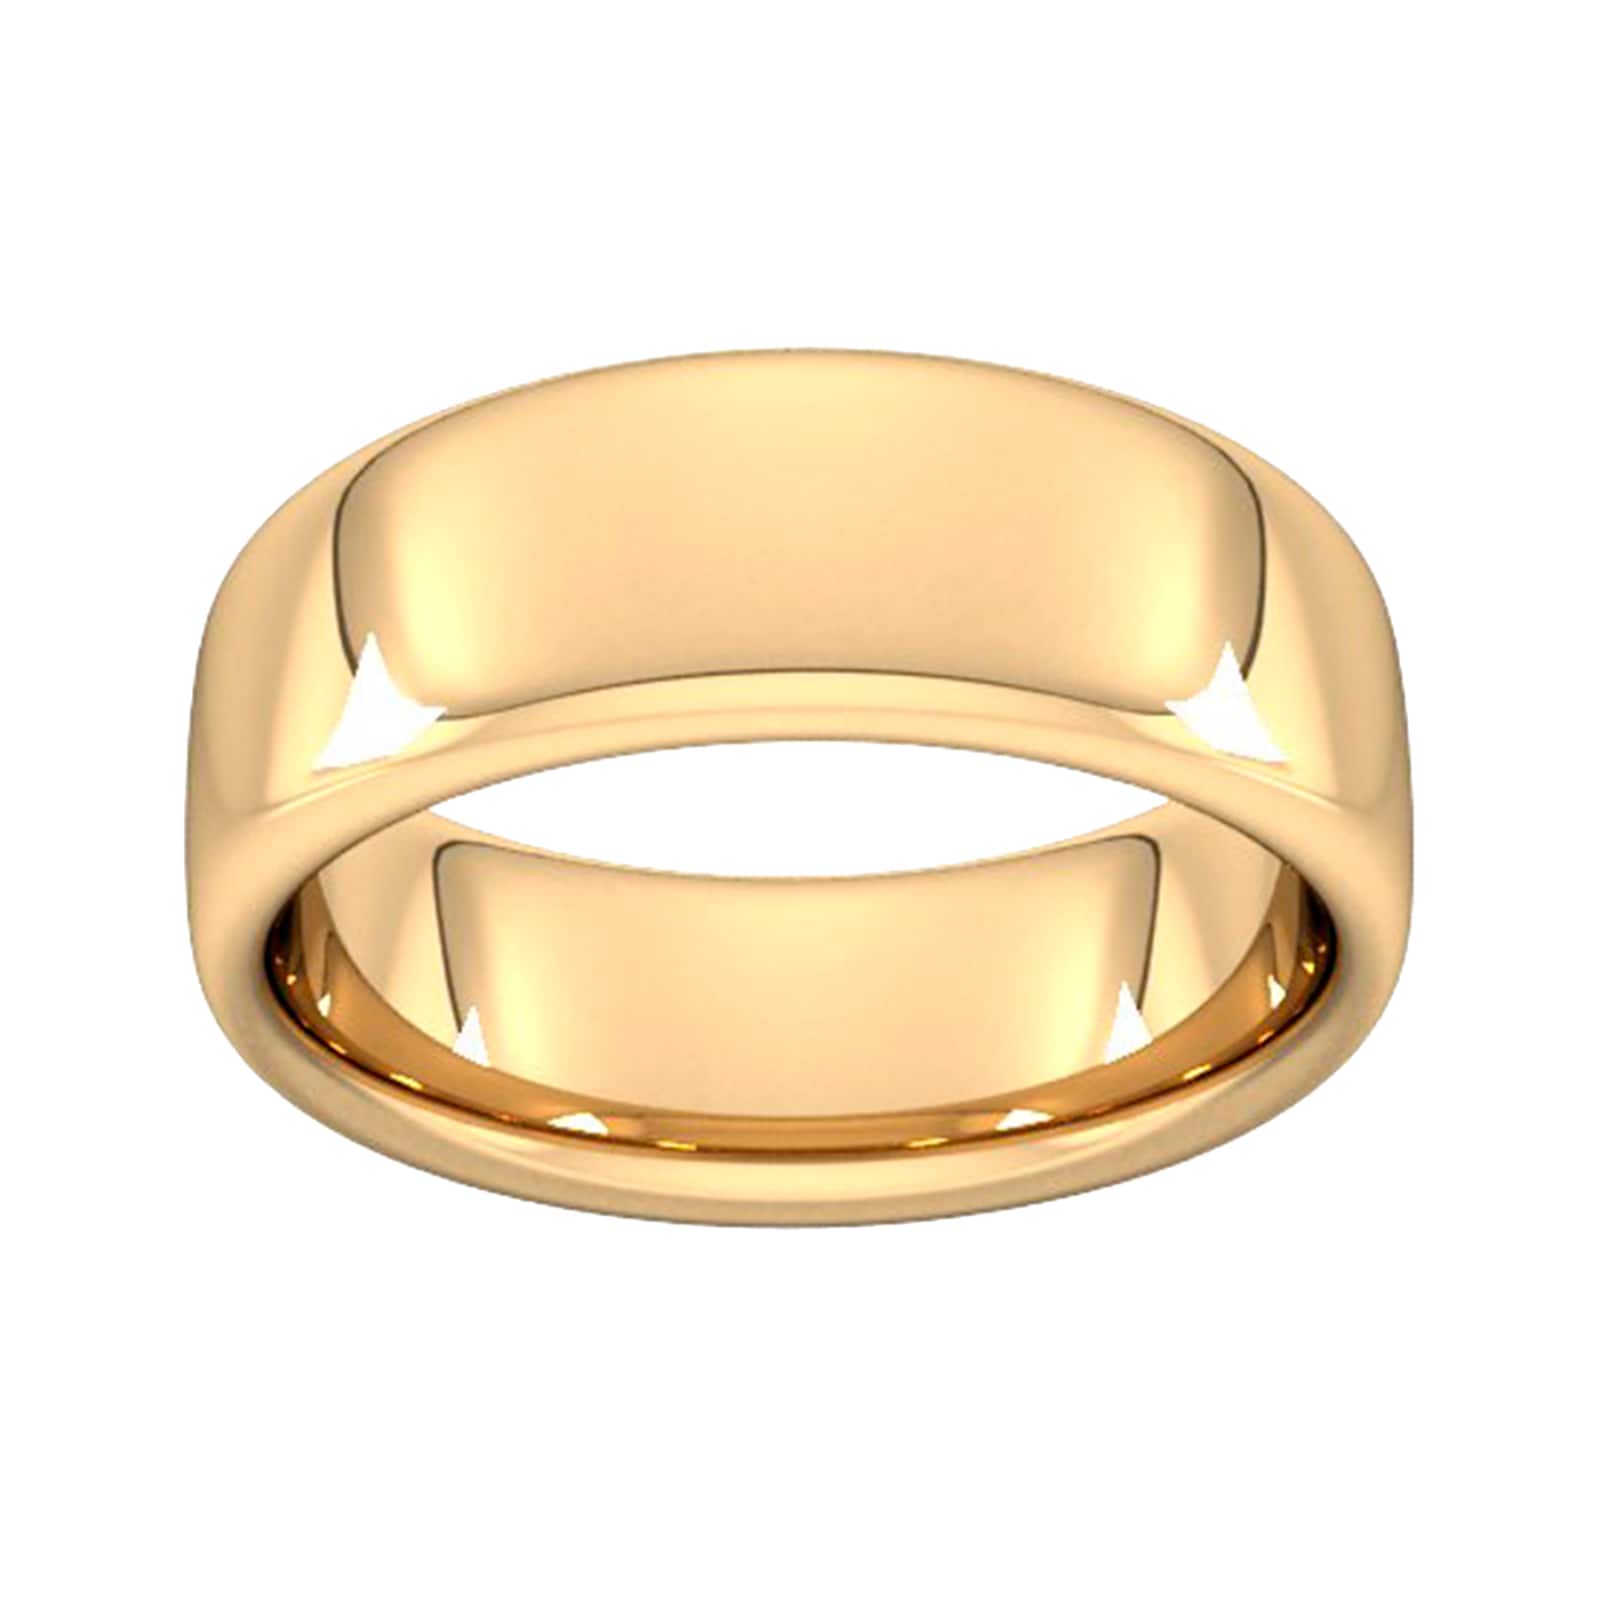 8mm Slight Court Extra Heavy Wedding Ring In 9 Carat Yellow Gold - Ring Size R